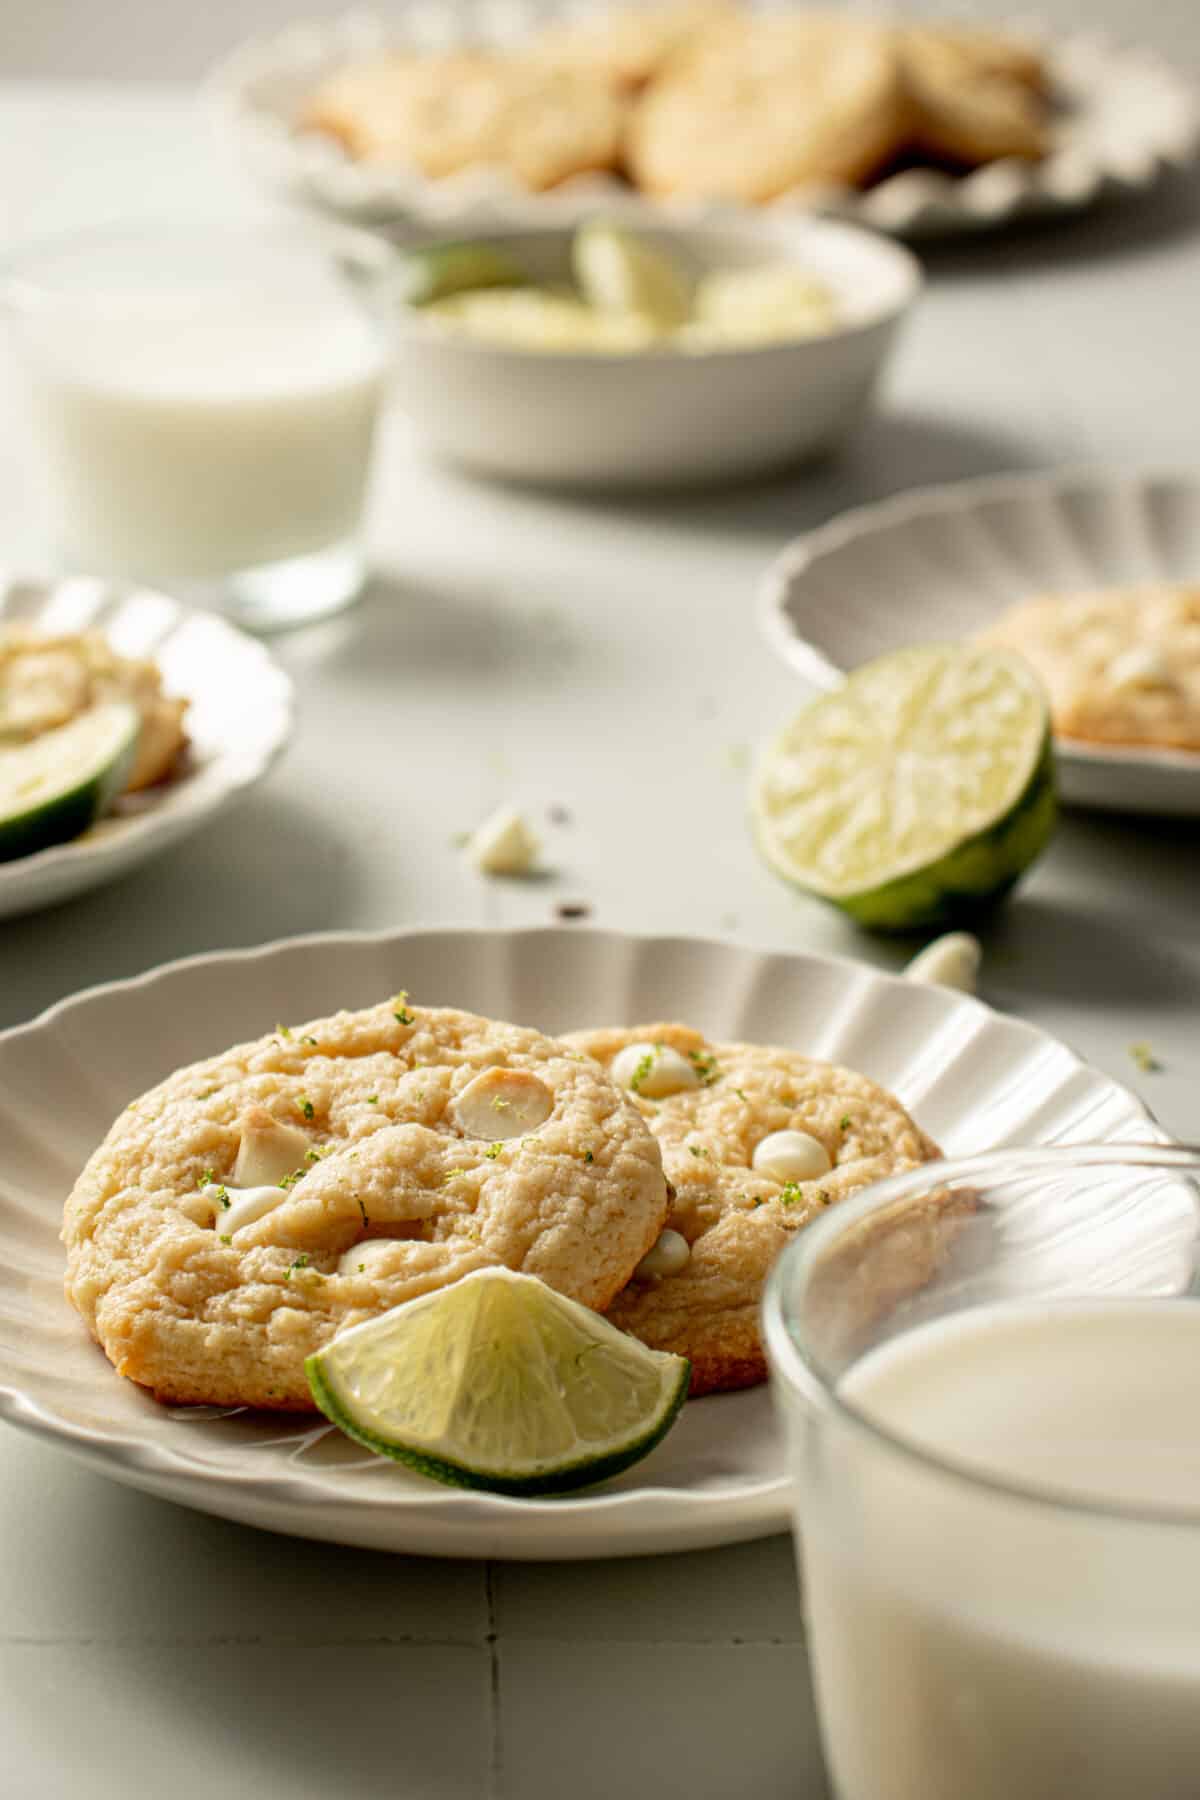 Cookies plated with limes around and a glass of milk. 